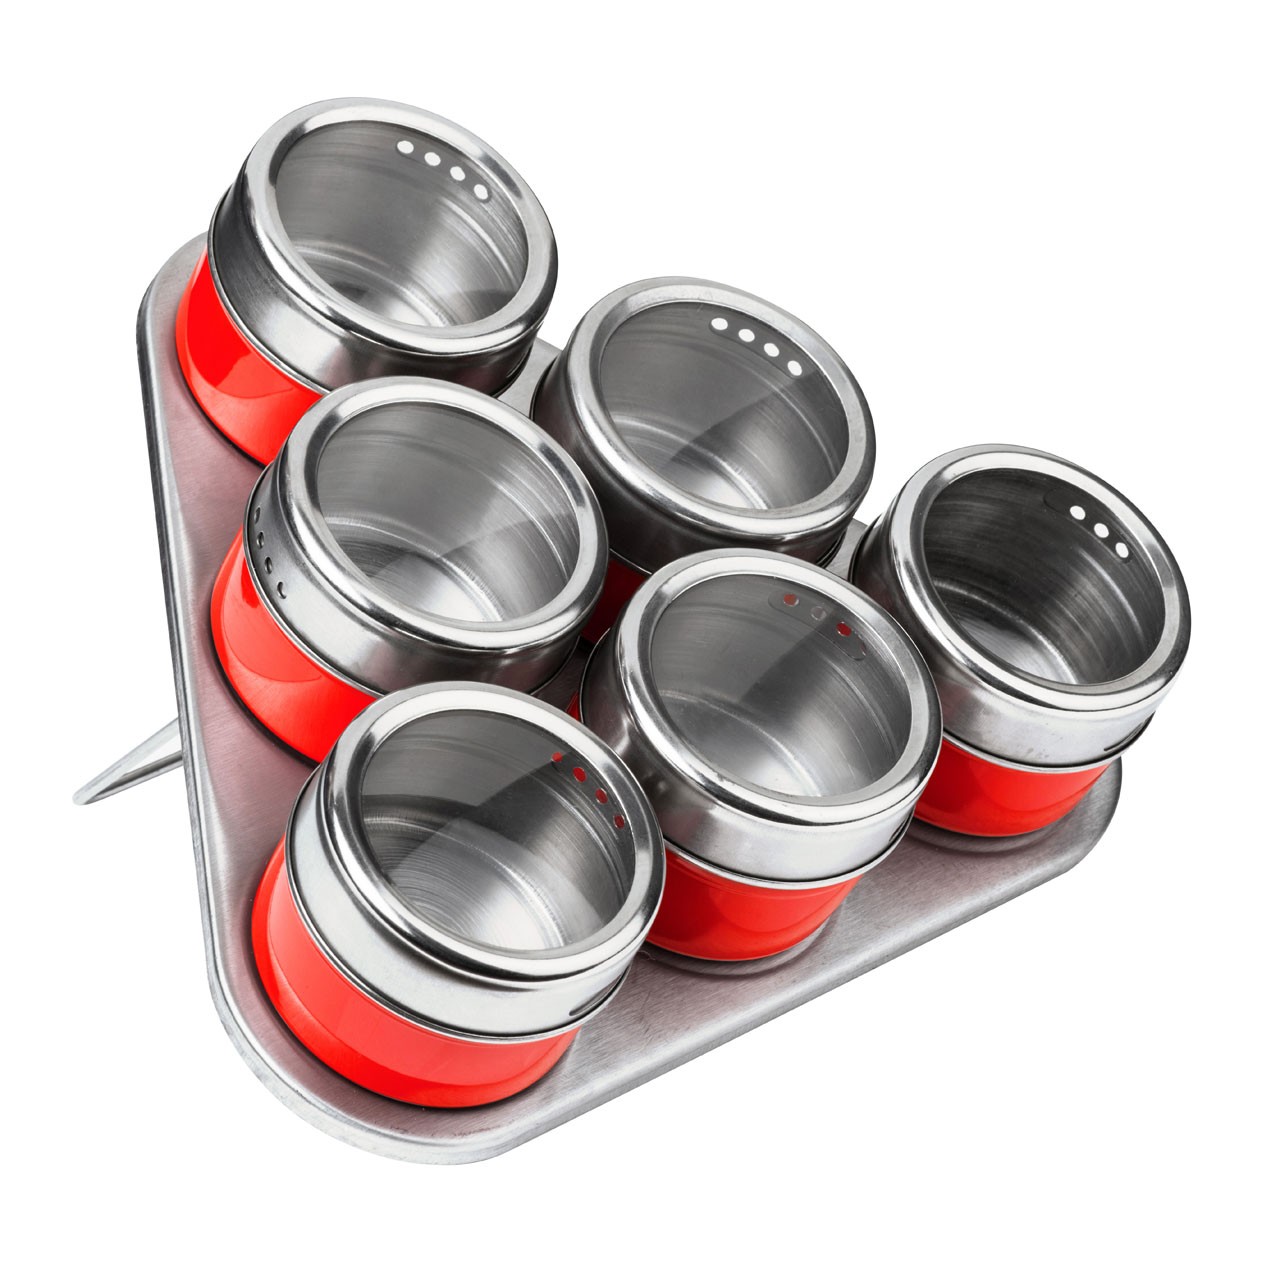 Magnetic Tray with 6 Spice Jars - Red